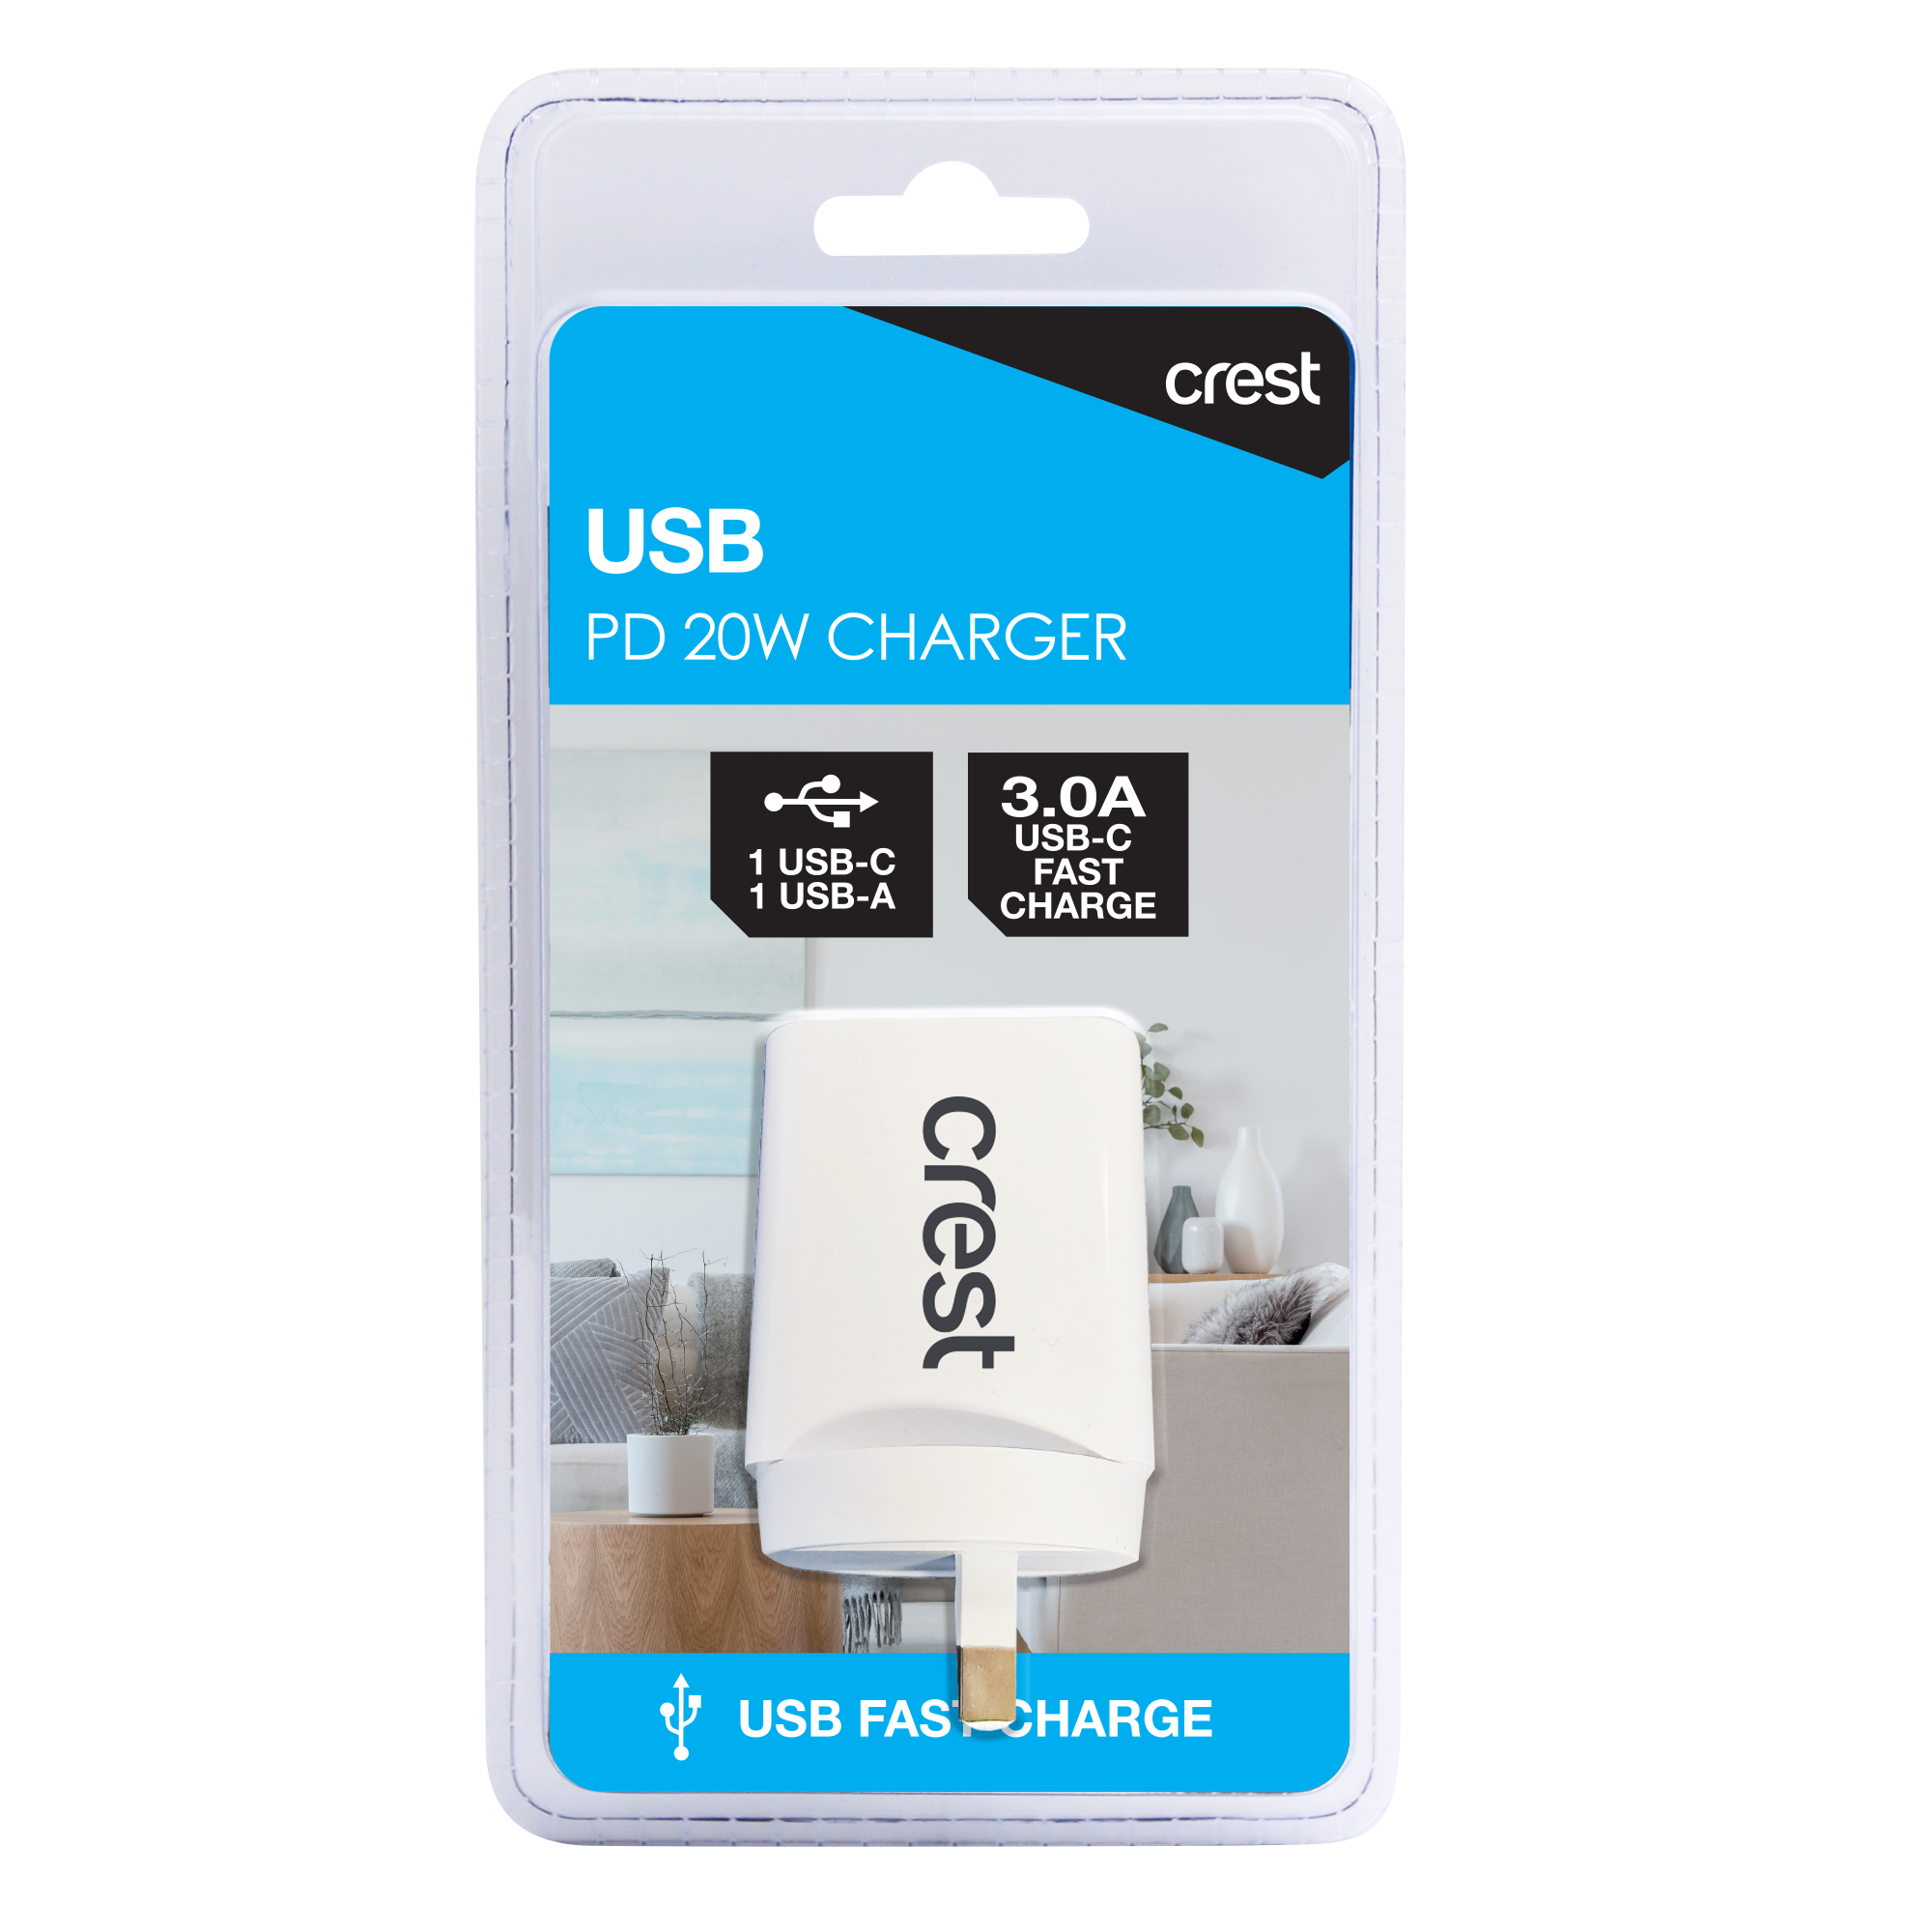 PD 20W Dual USB Charger